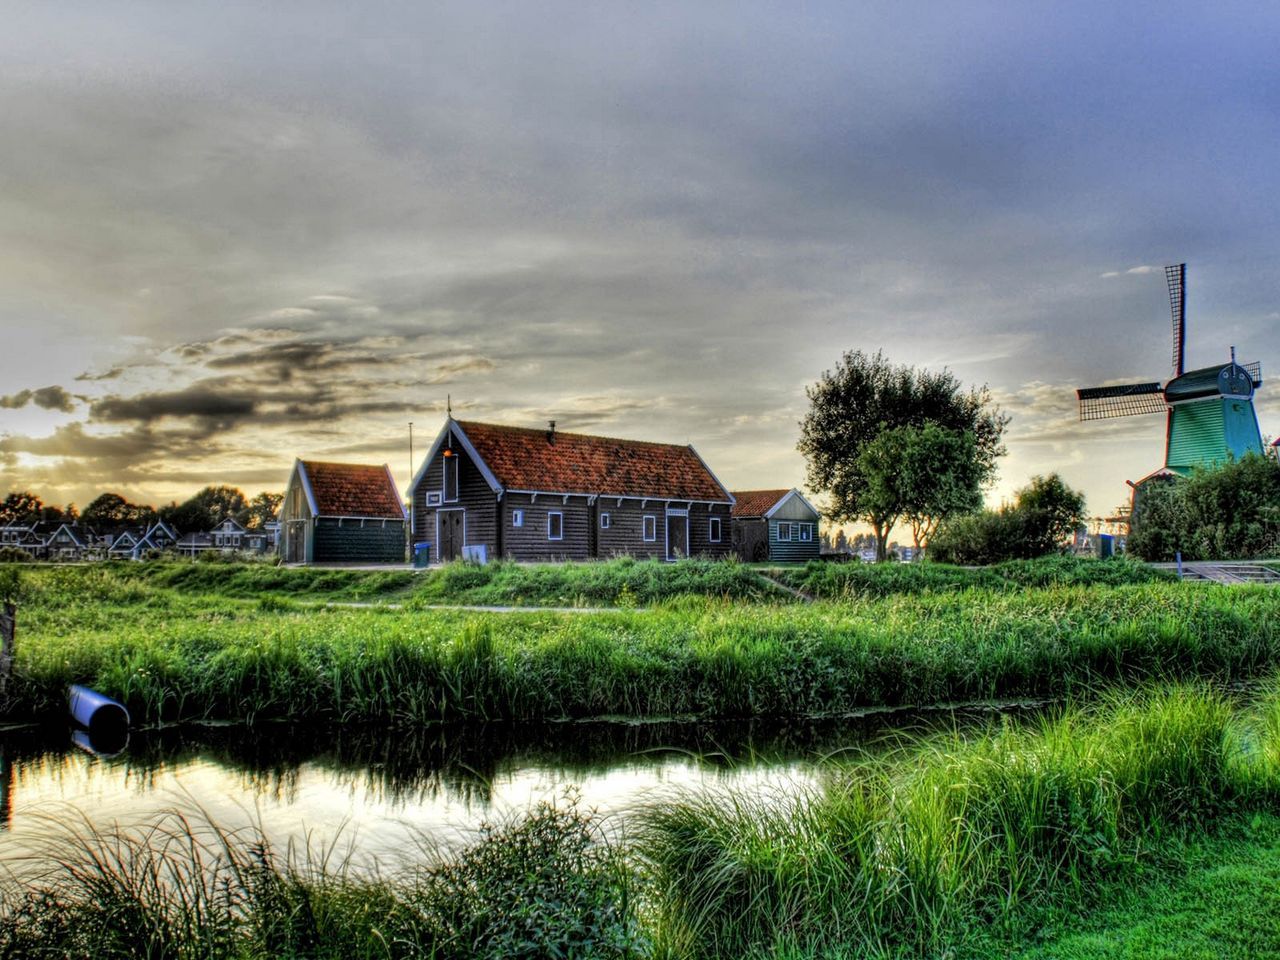 Download wallpaper 1280x960 village, mill, house, grass, lake, hdr standard 4:3 HD background